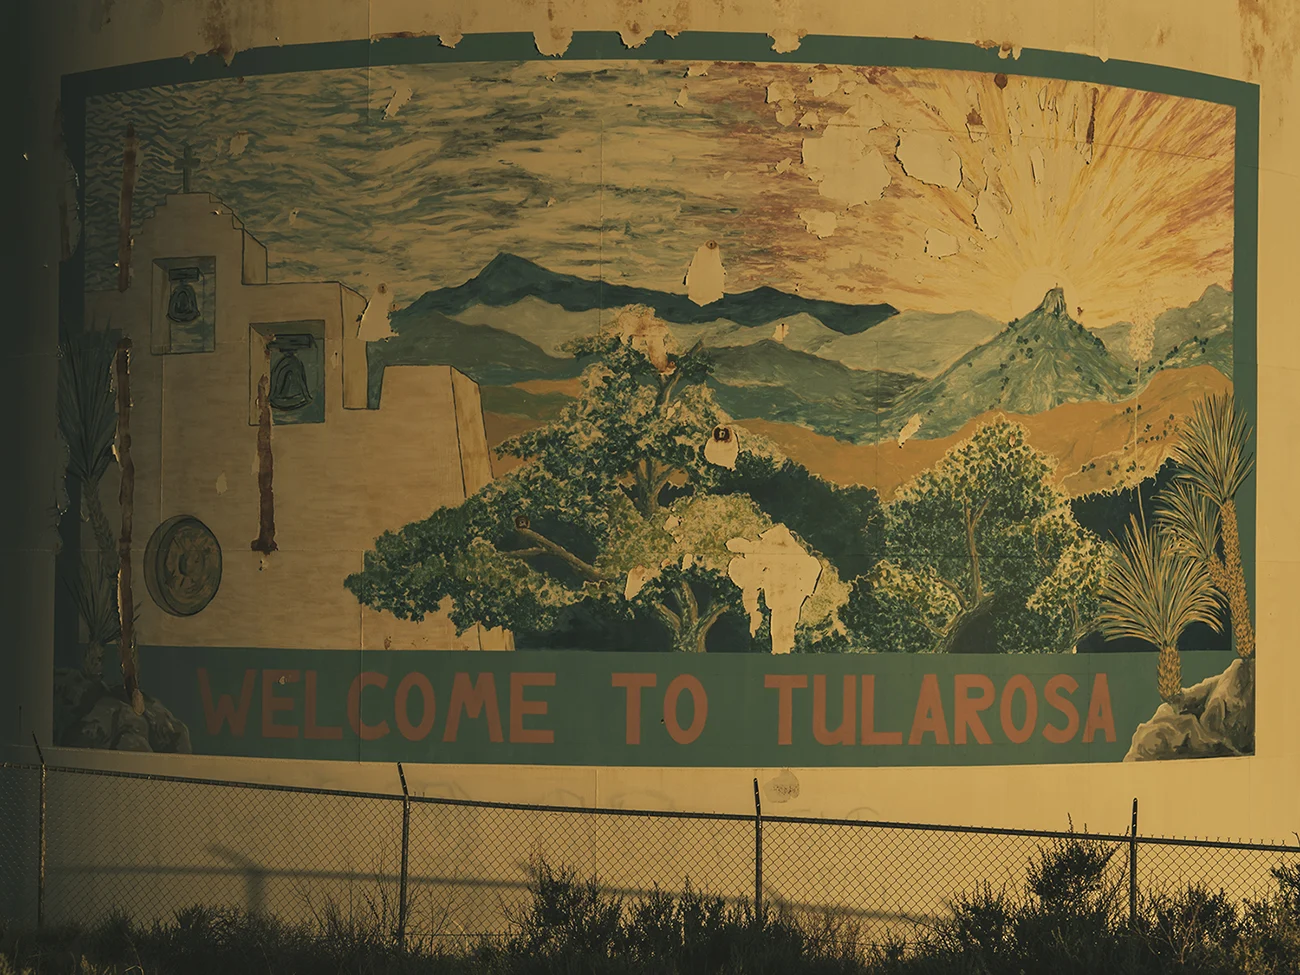 A painting of the rising sun over a church on a silo at Tularosa